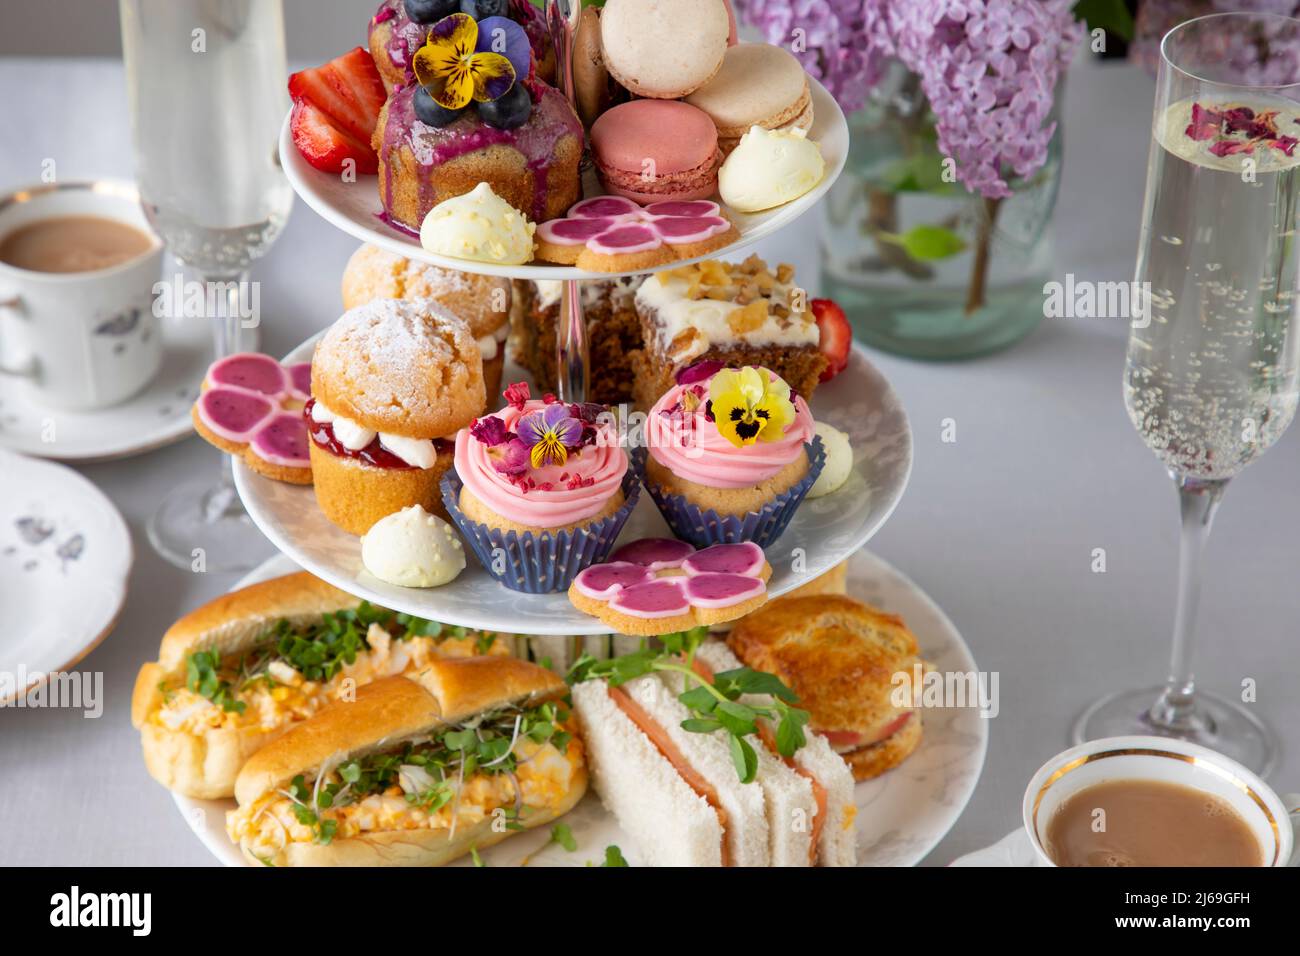 Traditional english afternoon tea with selection of cakes and sandwiches Stock Photo